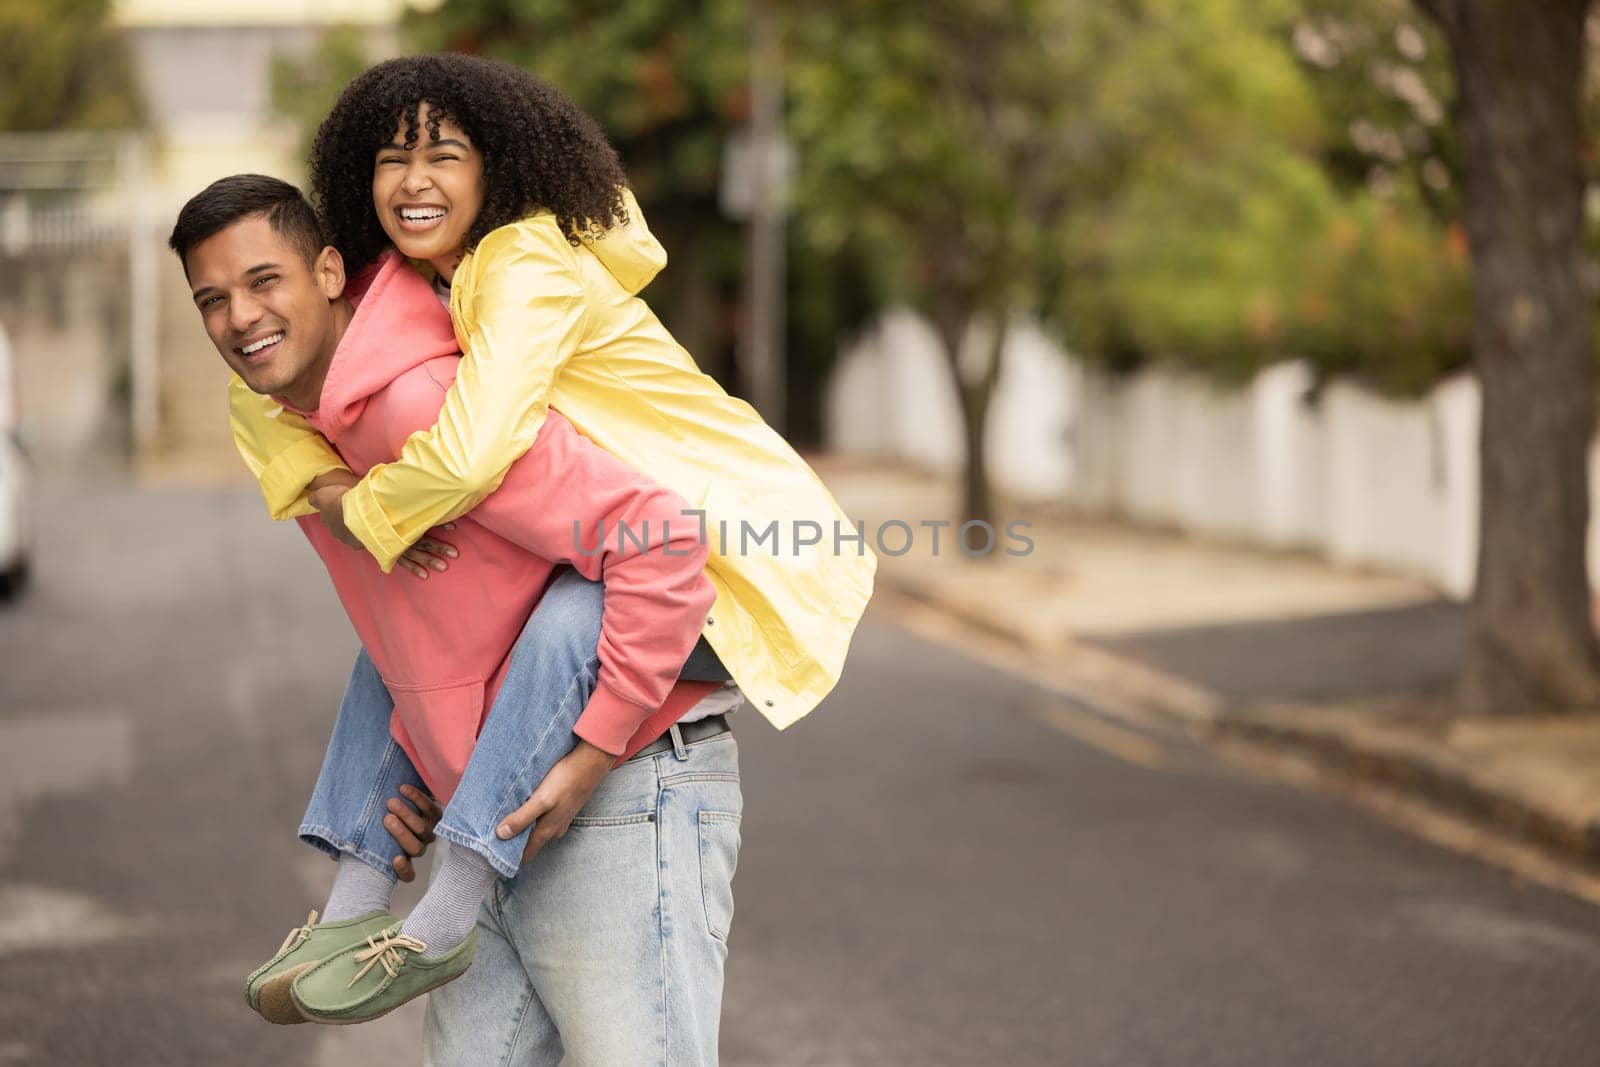 Black couple, piggyback and portrait of young people with love, care and bonding in a street. Urban, happy and black woman and man together with a smile and happiness loving summer fun outdoor.